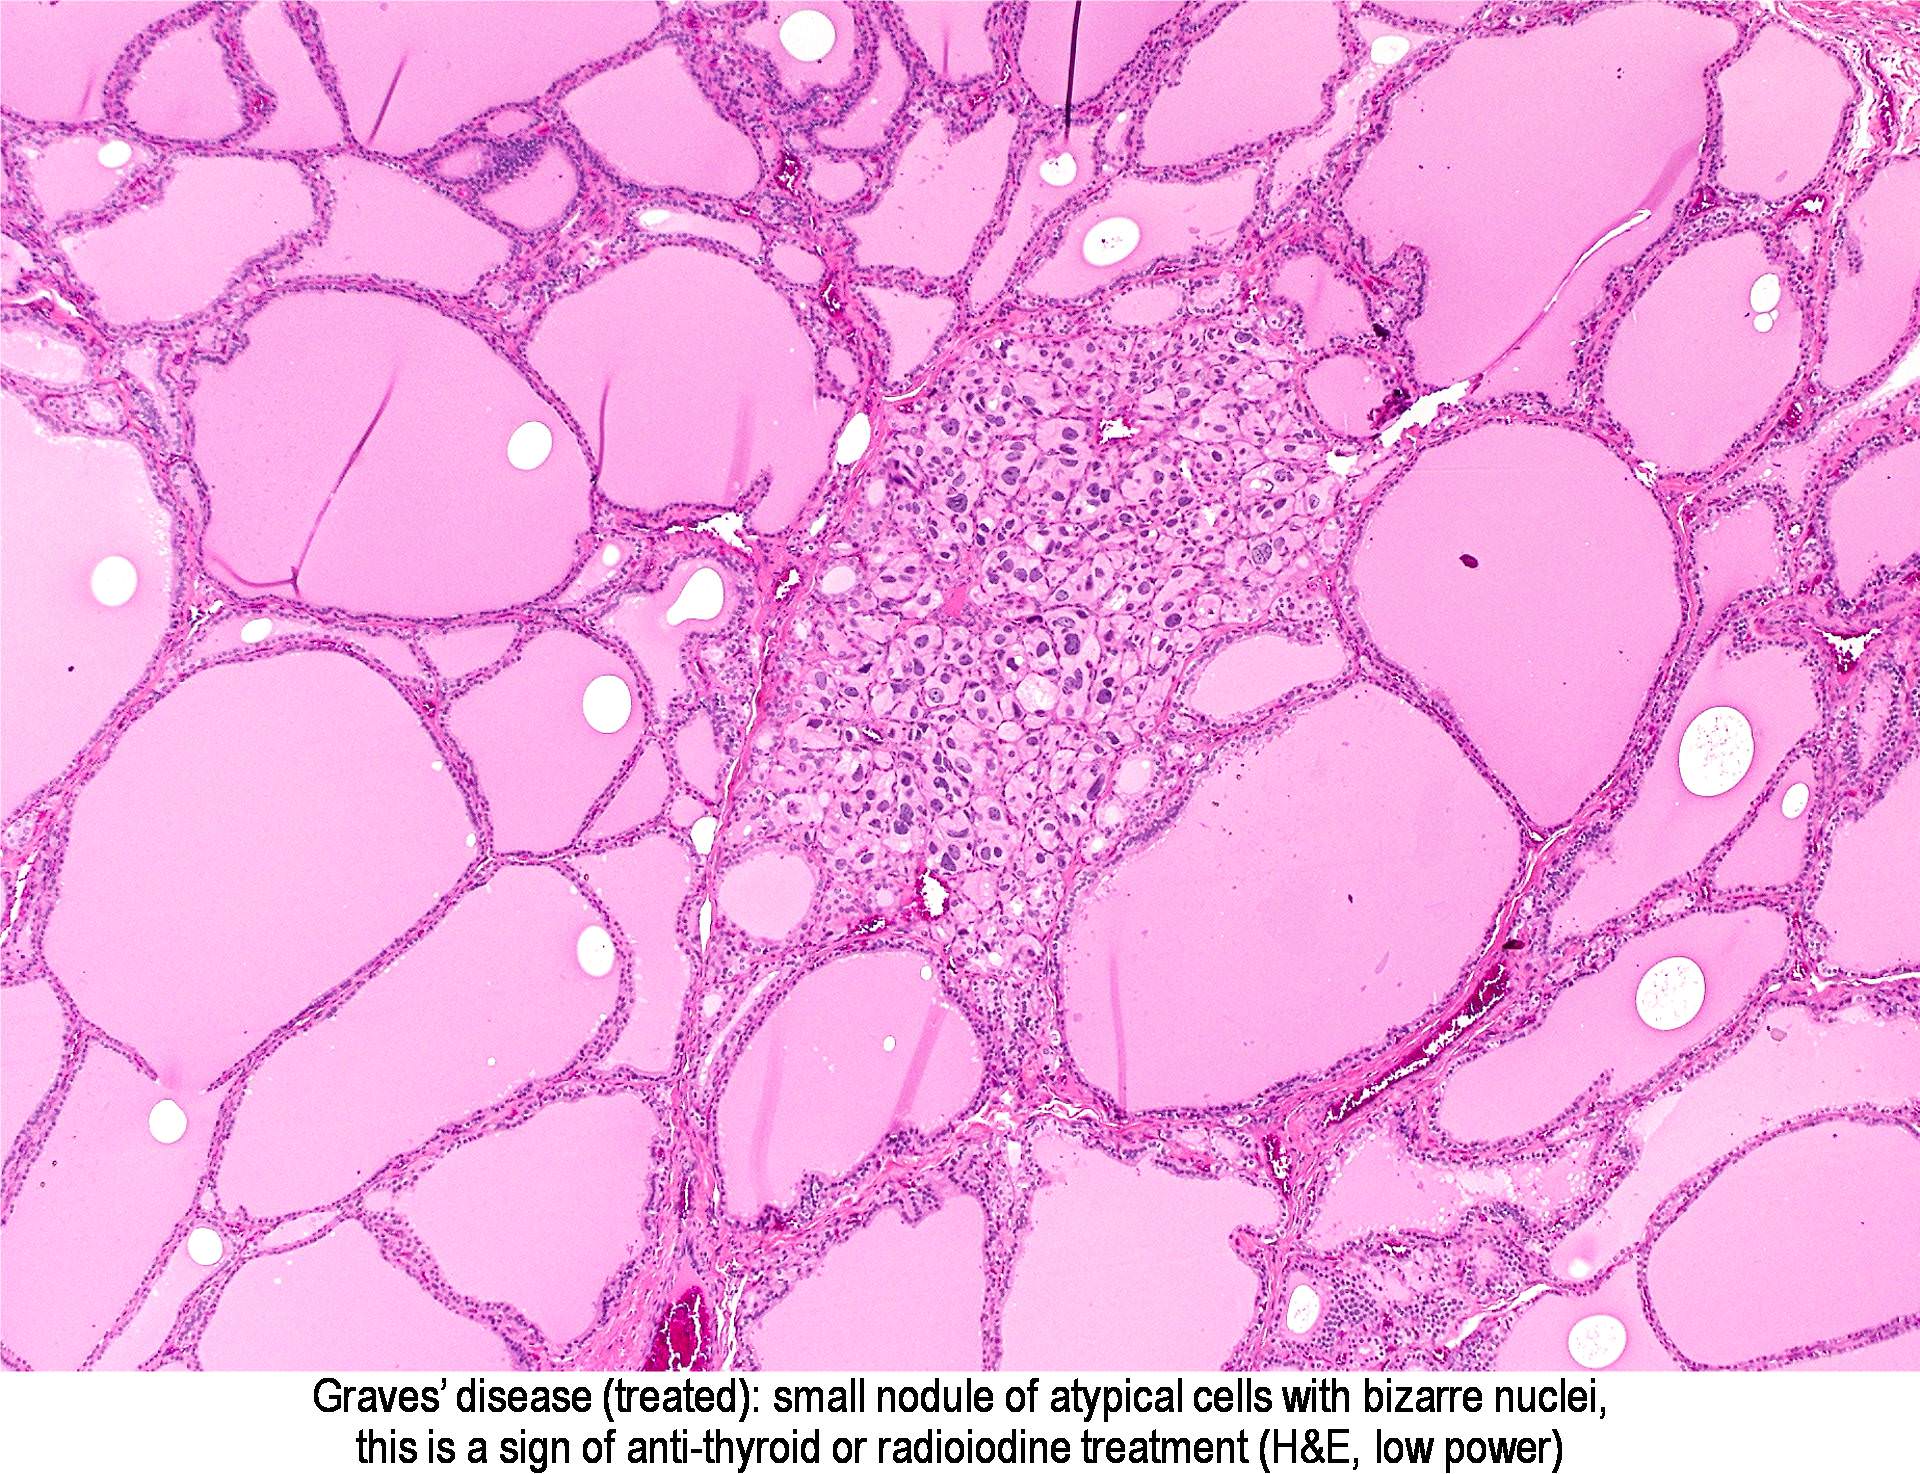 Pathology Outlines - Graves disease